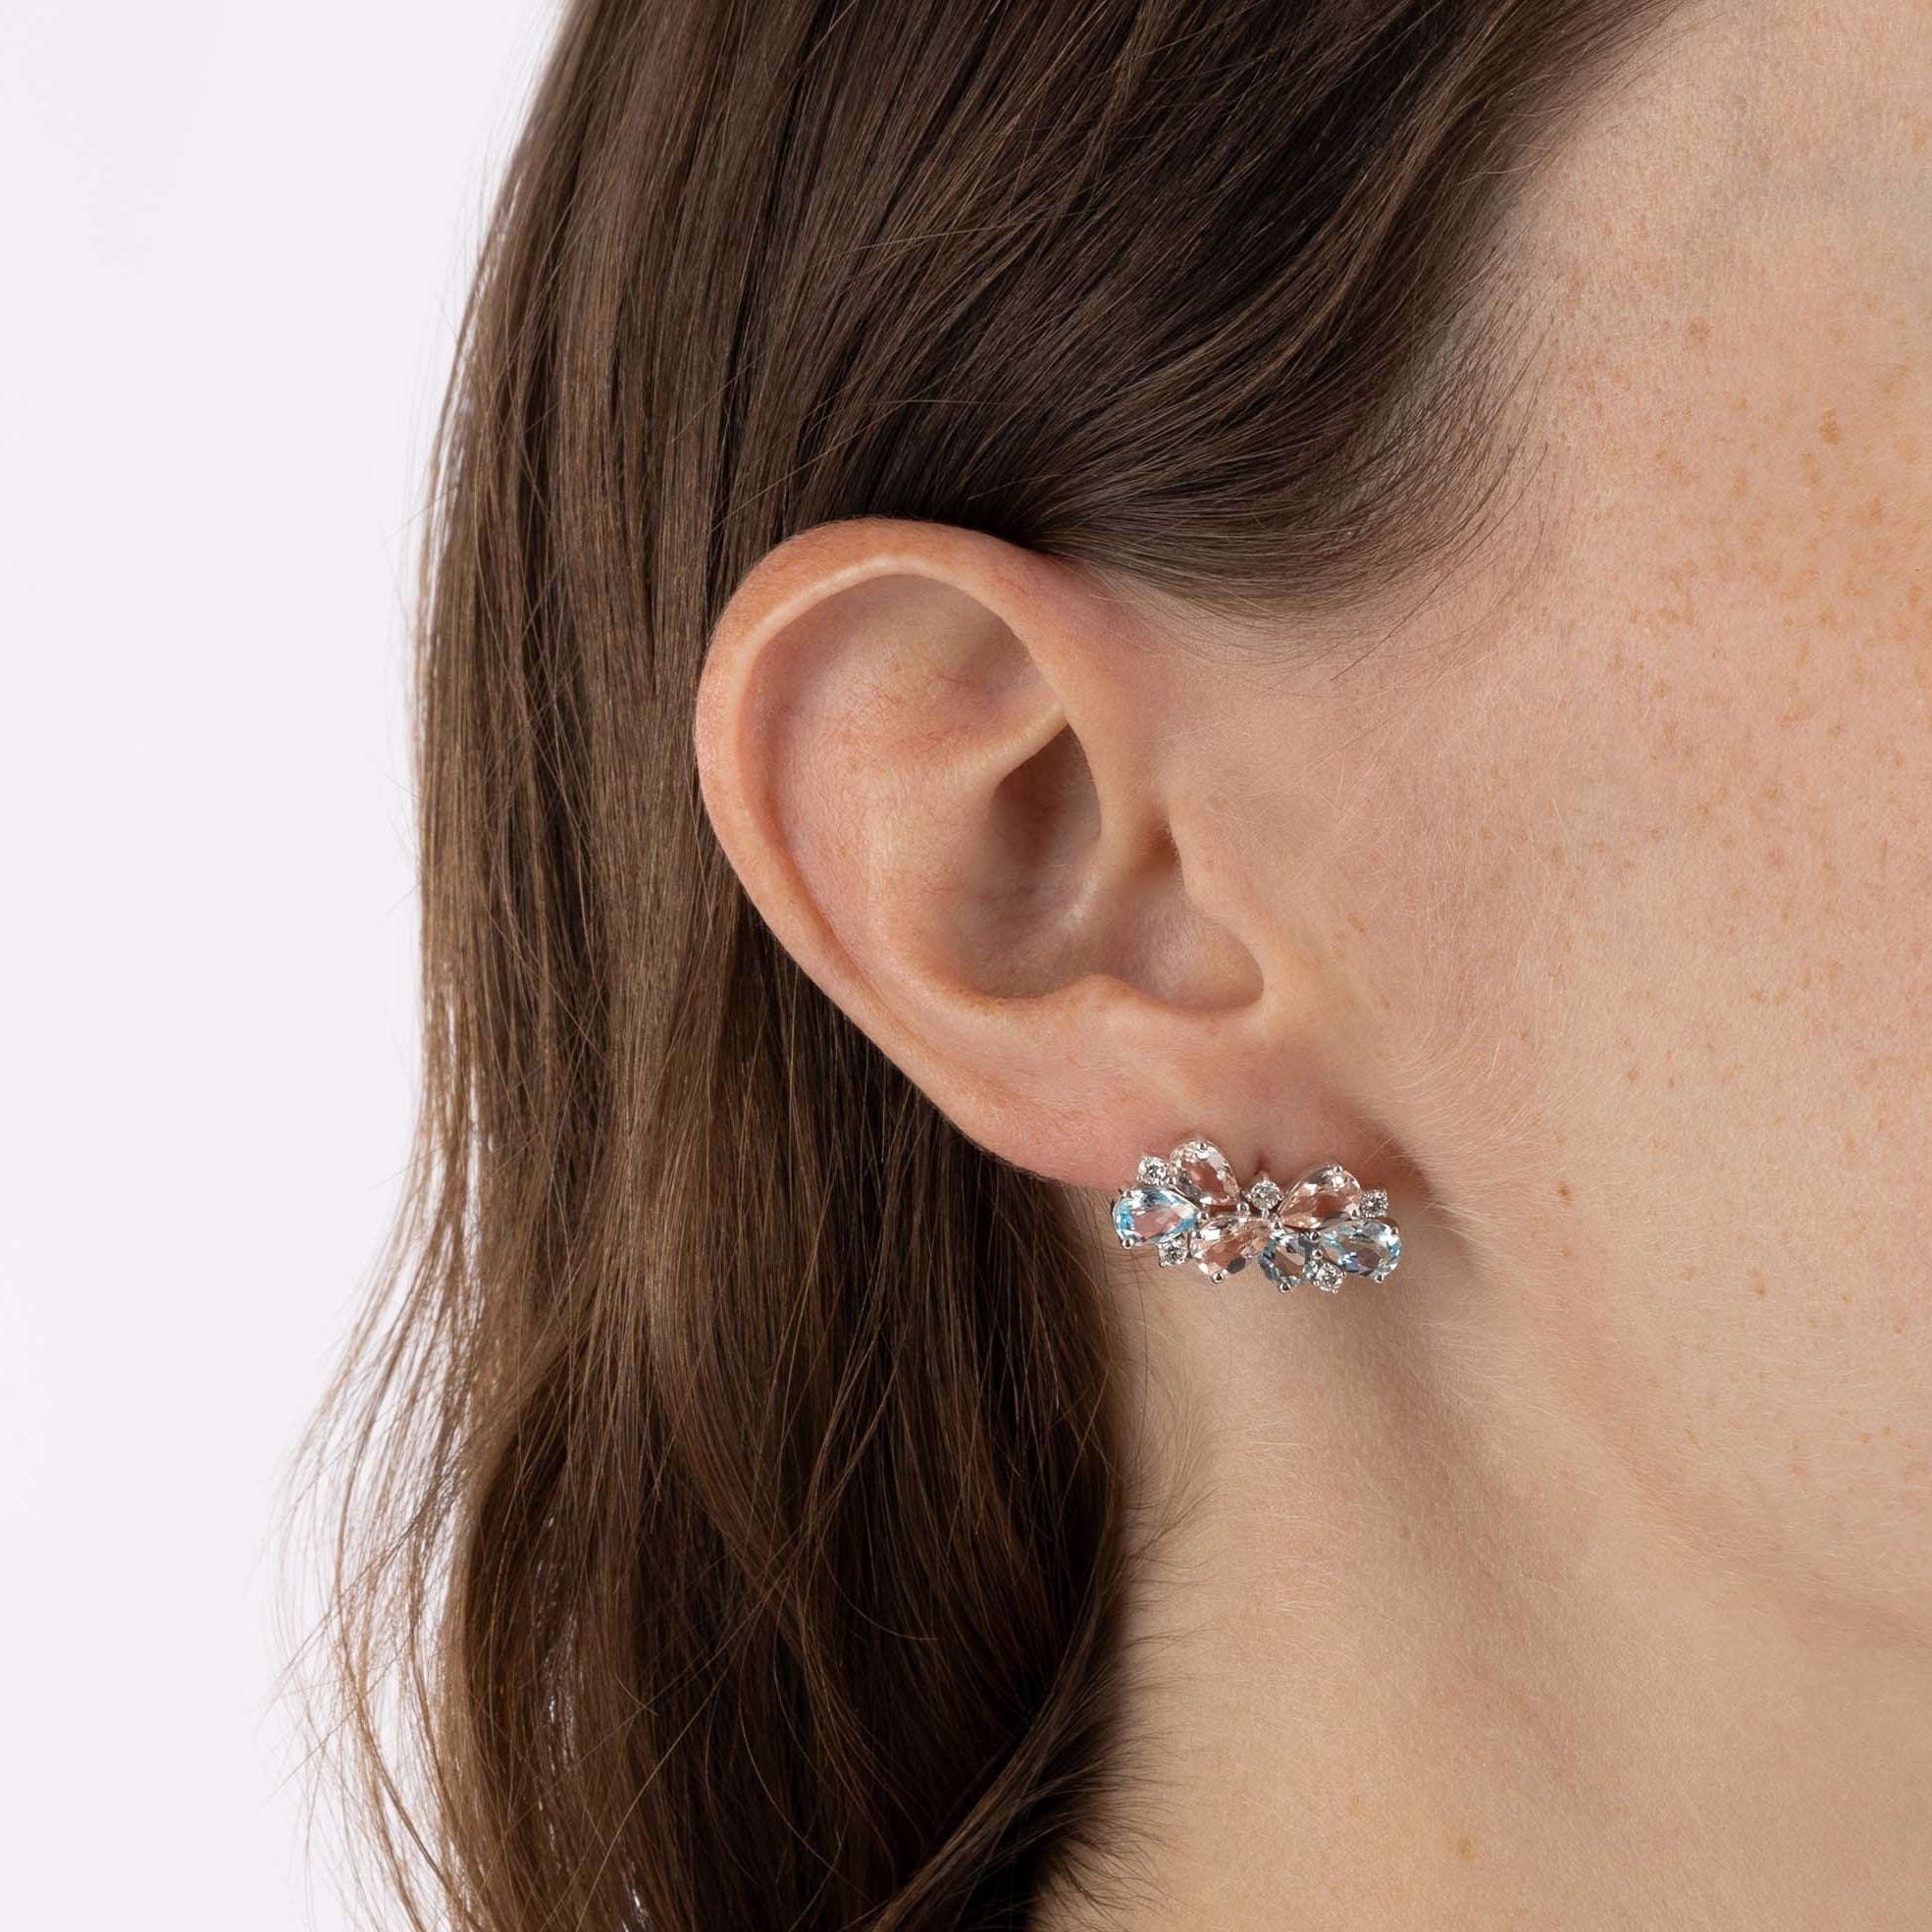 White Gold Earrings with Morganite, Topaz, and Diamonds, Small - Model shot